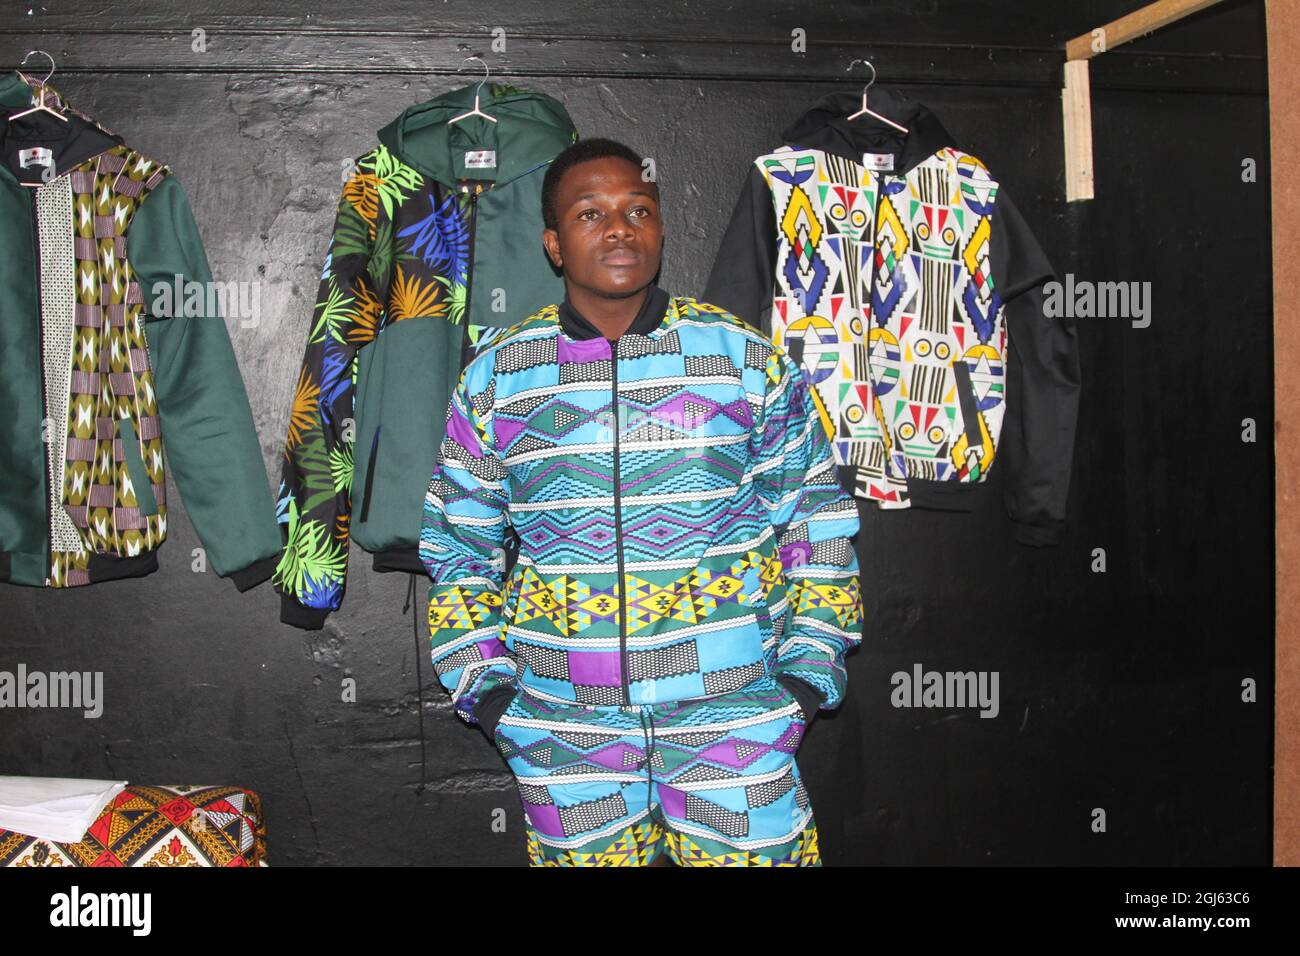 Harare, Zimbabwe. 1st Sep, 2021. A man wearing an outfit made from African print fabric poses for a photo in Harare, capital of Zimbabwe, Sept. 1, 2021. Bakari Sibanda, founder and creative director of Harare-based #byBakari fashion brand, uses African print fabric to make stylish clothing that reflects the artistic expression of African culture. TO GO WITH 'Feature: Zimbabwean fashion entrepreneur fuses tradition with modernity in eye-catching ways' Credit: Tafara Mugwara/Xinhua/Alamy Live News Stock Photo